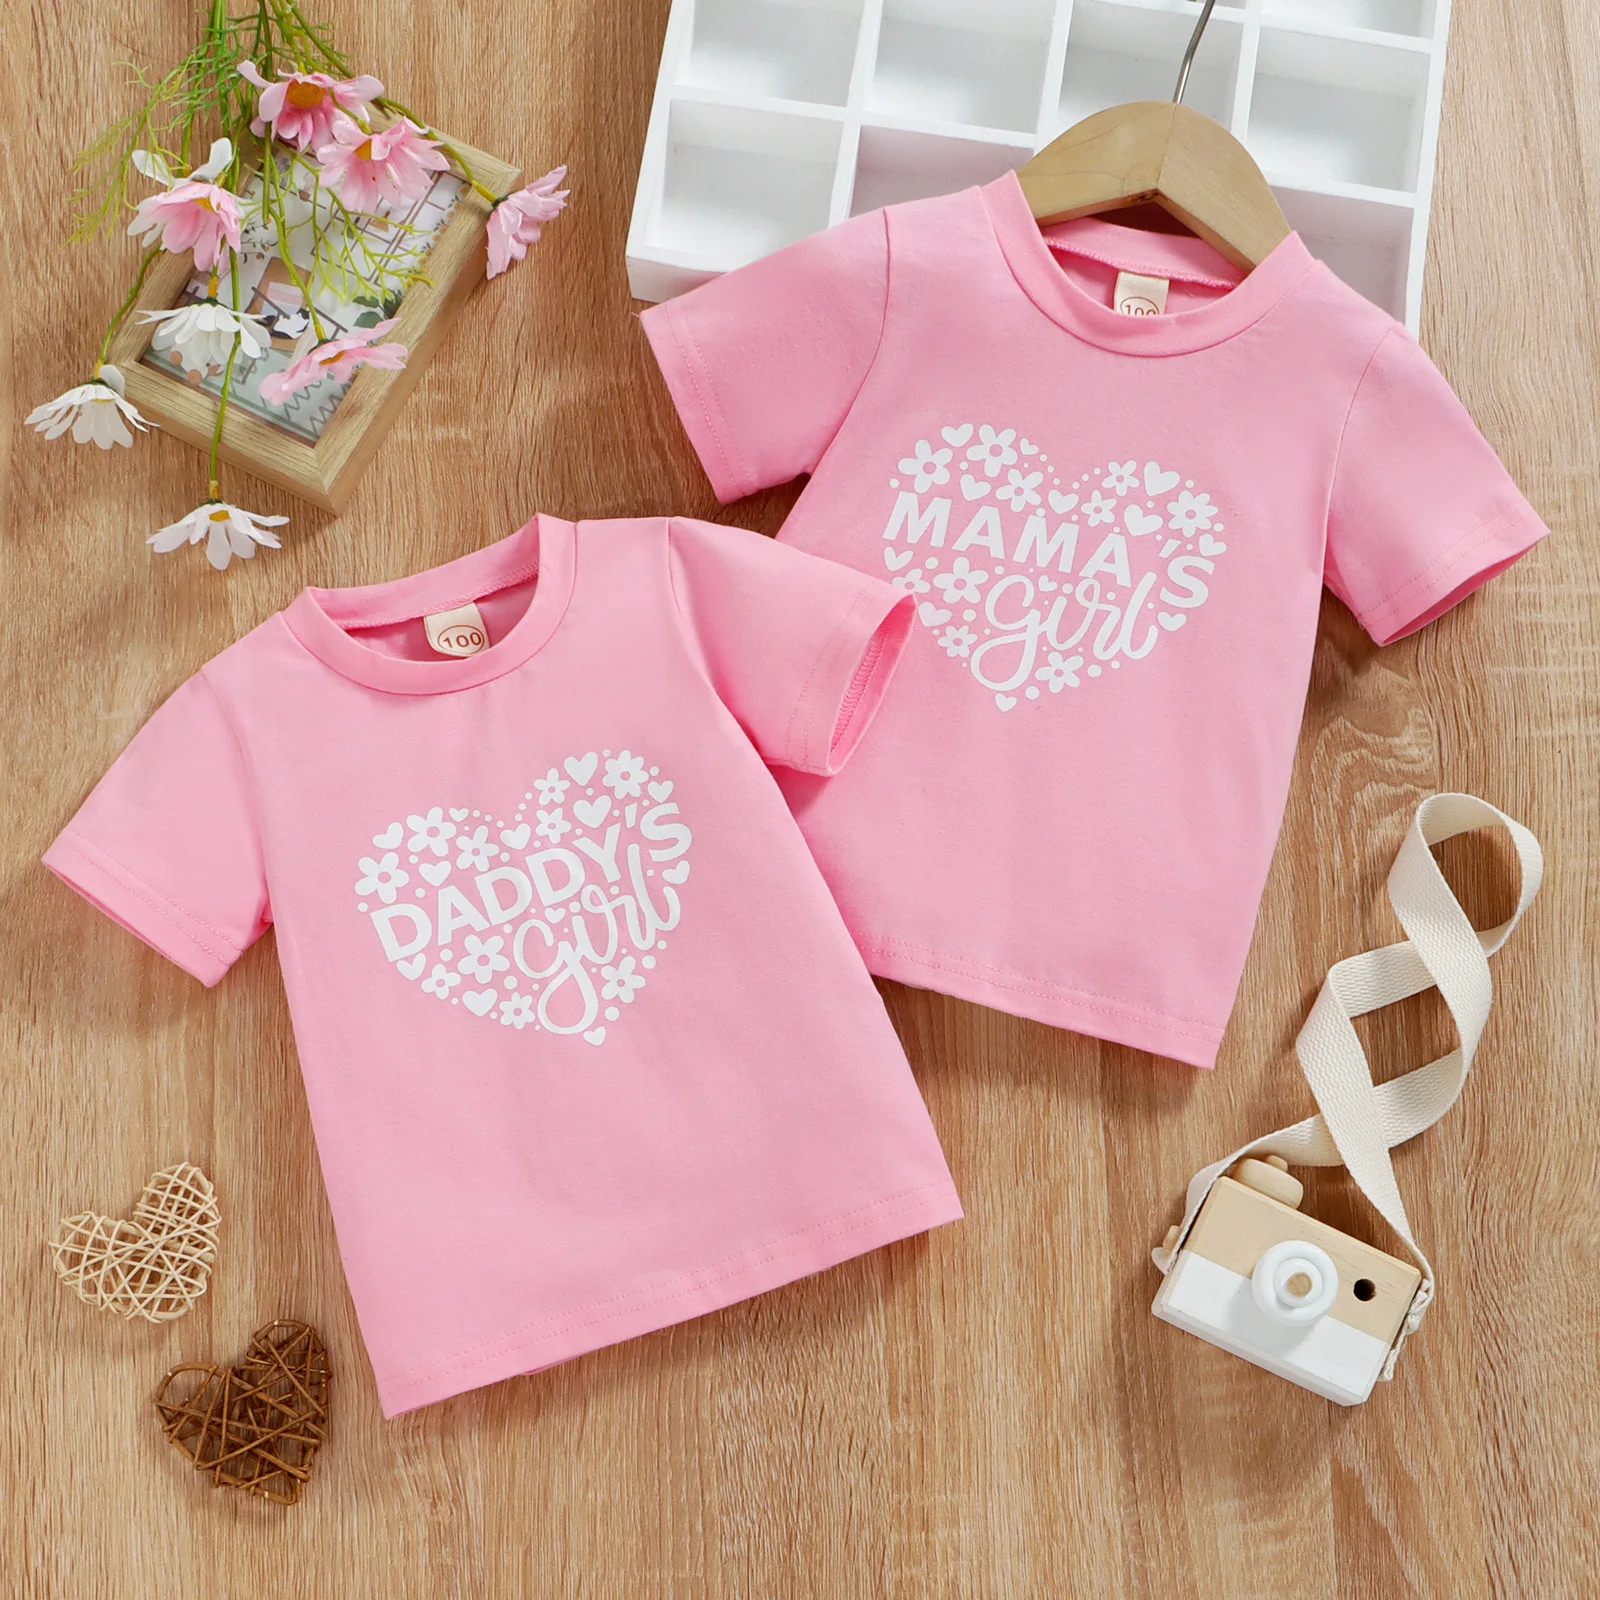 Summer Cute Girls Love Sisters Wear Parent-Child Breathable Short-Sleeved Cotton Sweatshirt T-Shirt Infant Girl Clothing18-24M